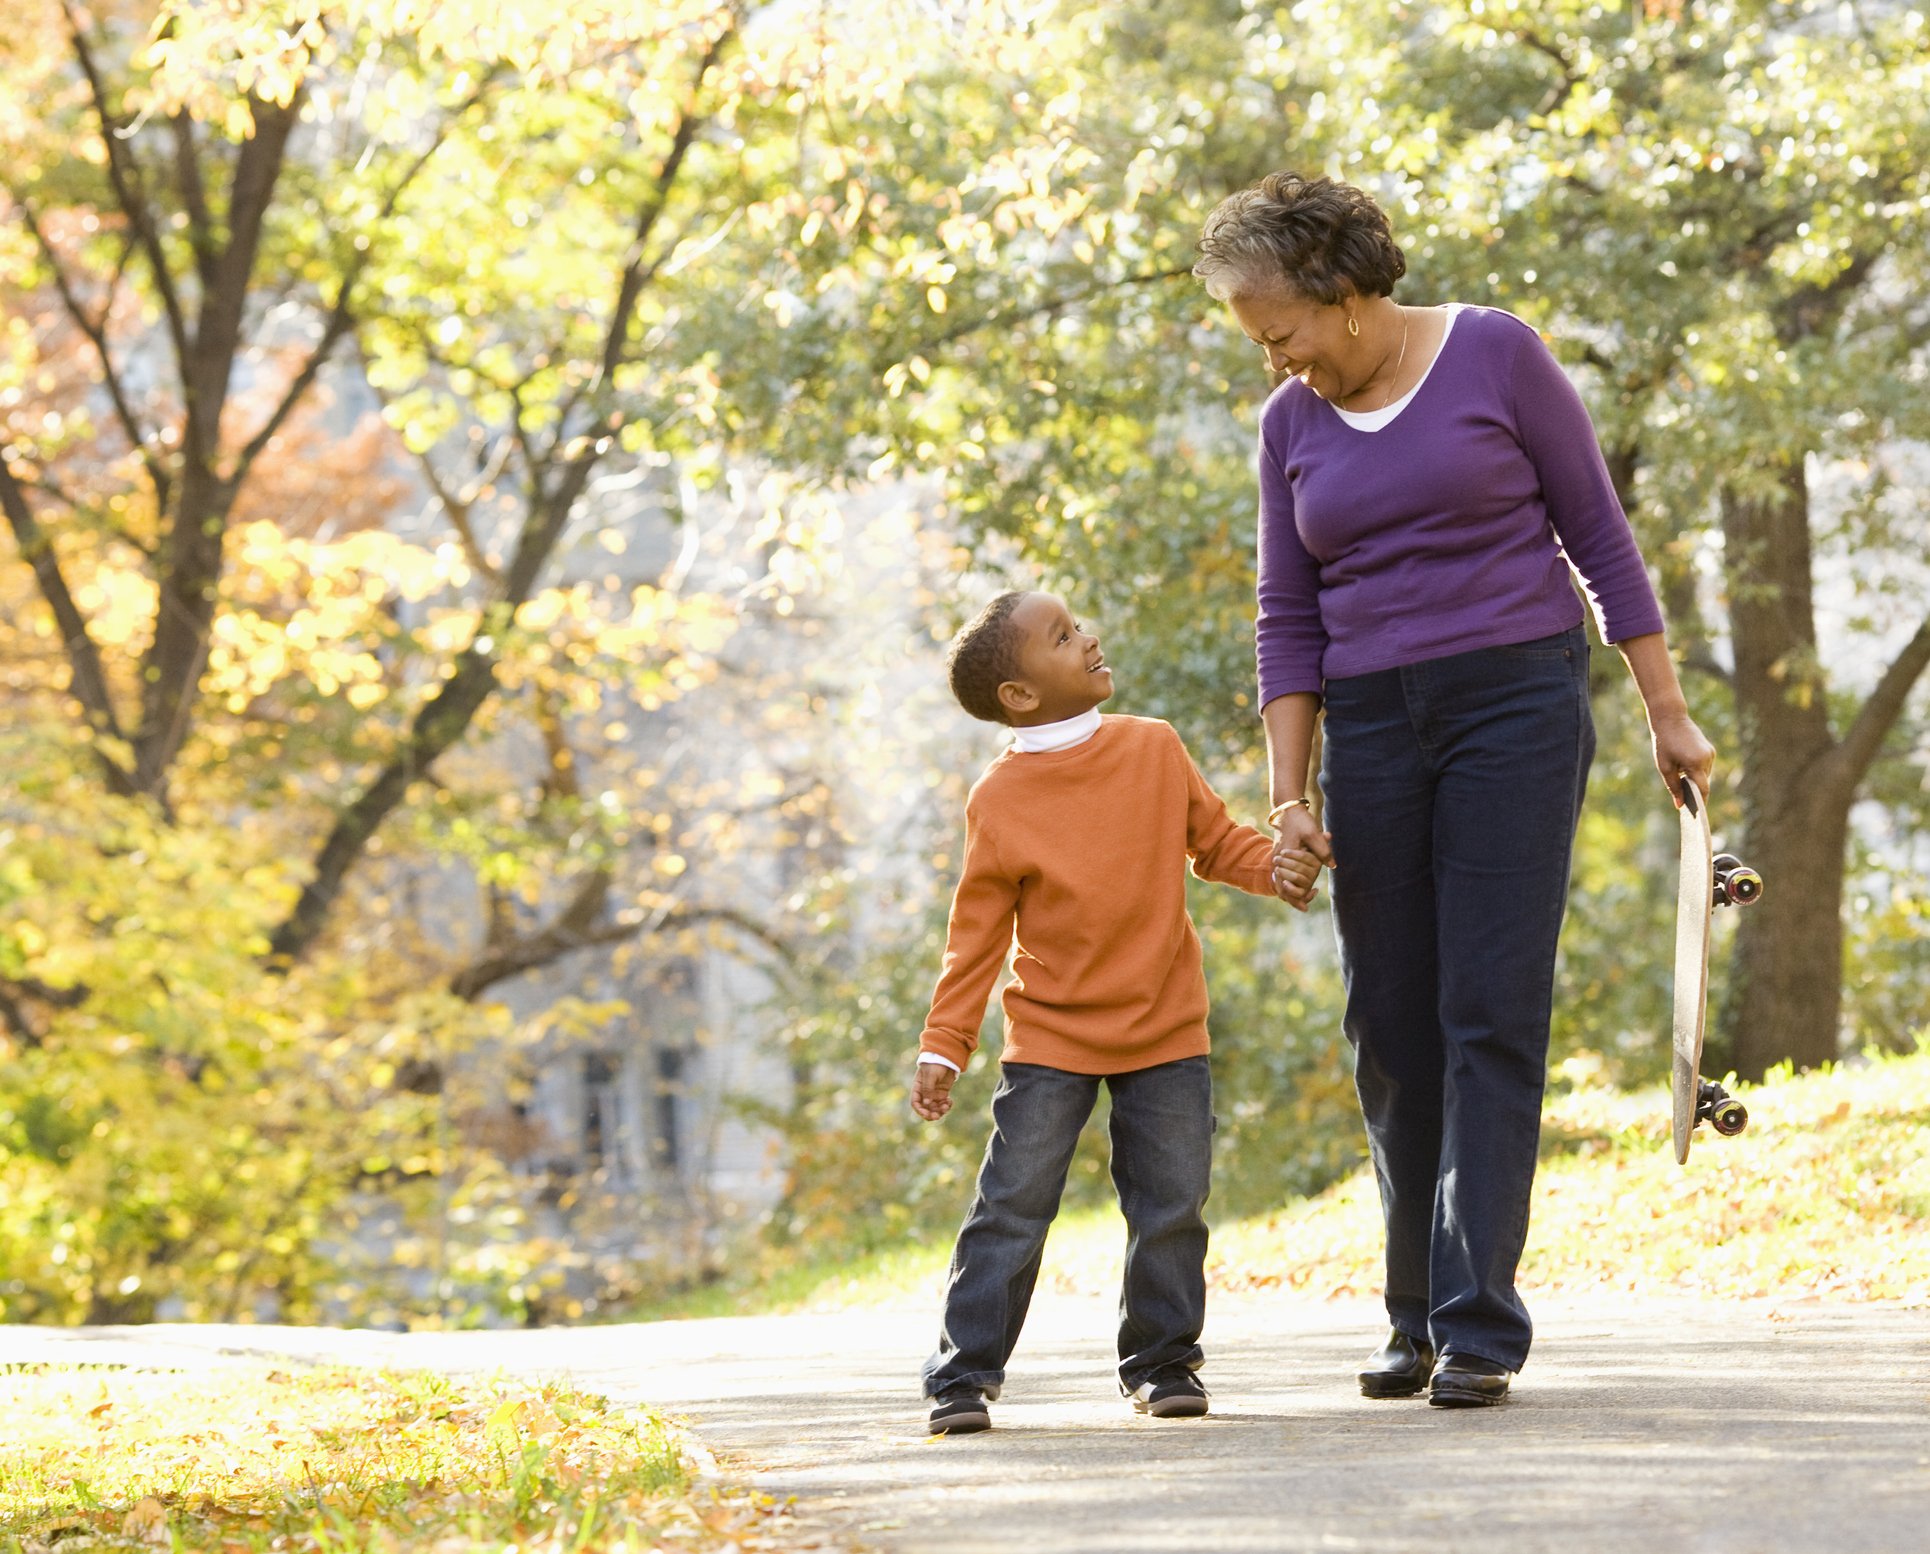 Grandmother and granson walking in park smiling | Photo: Getty Images